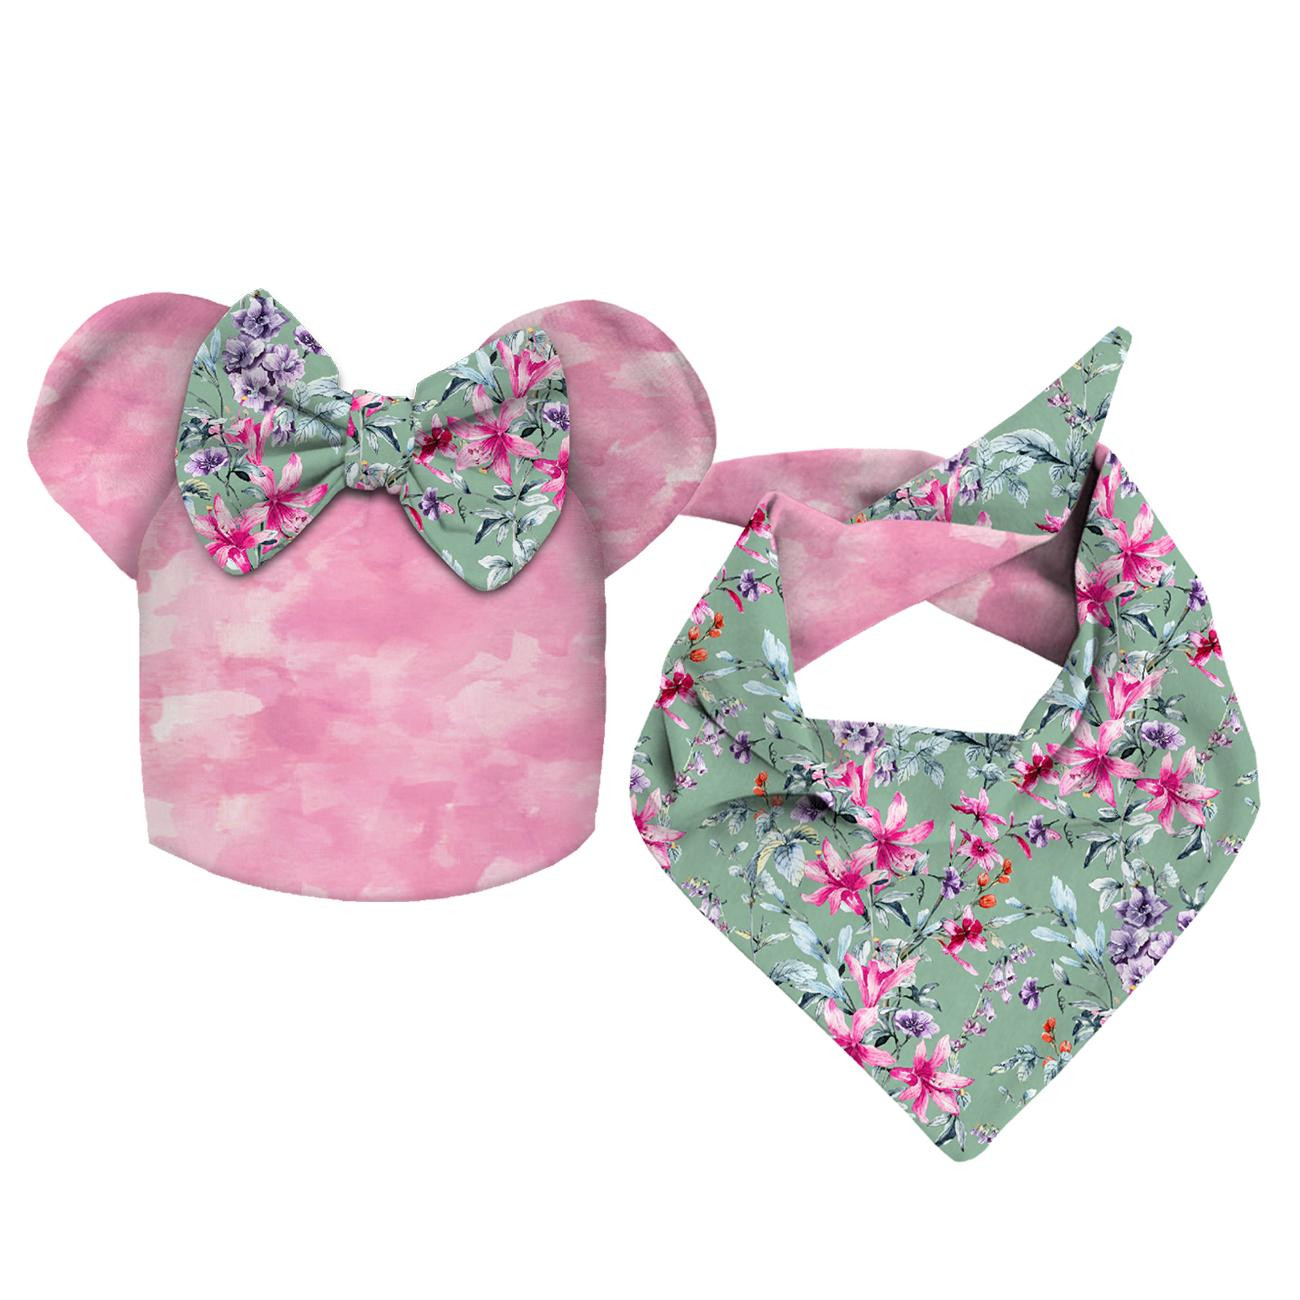 KID'S CAP AND SCARF (MOUSE) - SPRING MEADOW pat. 3 - sewing set